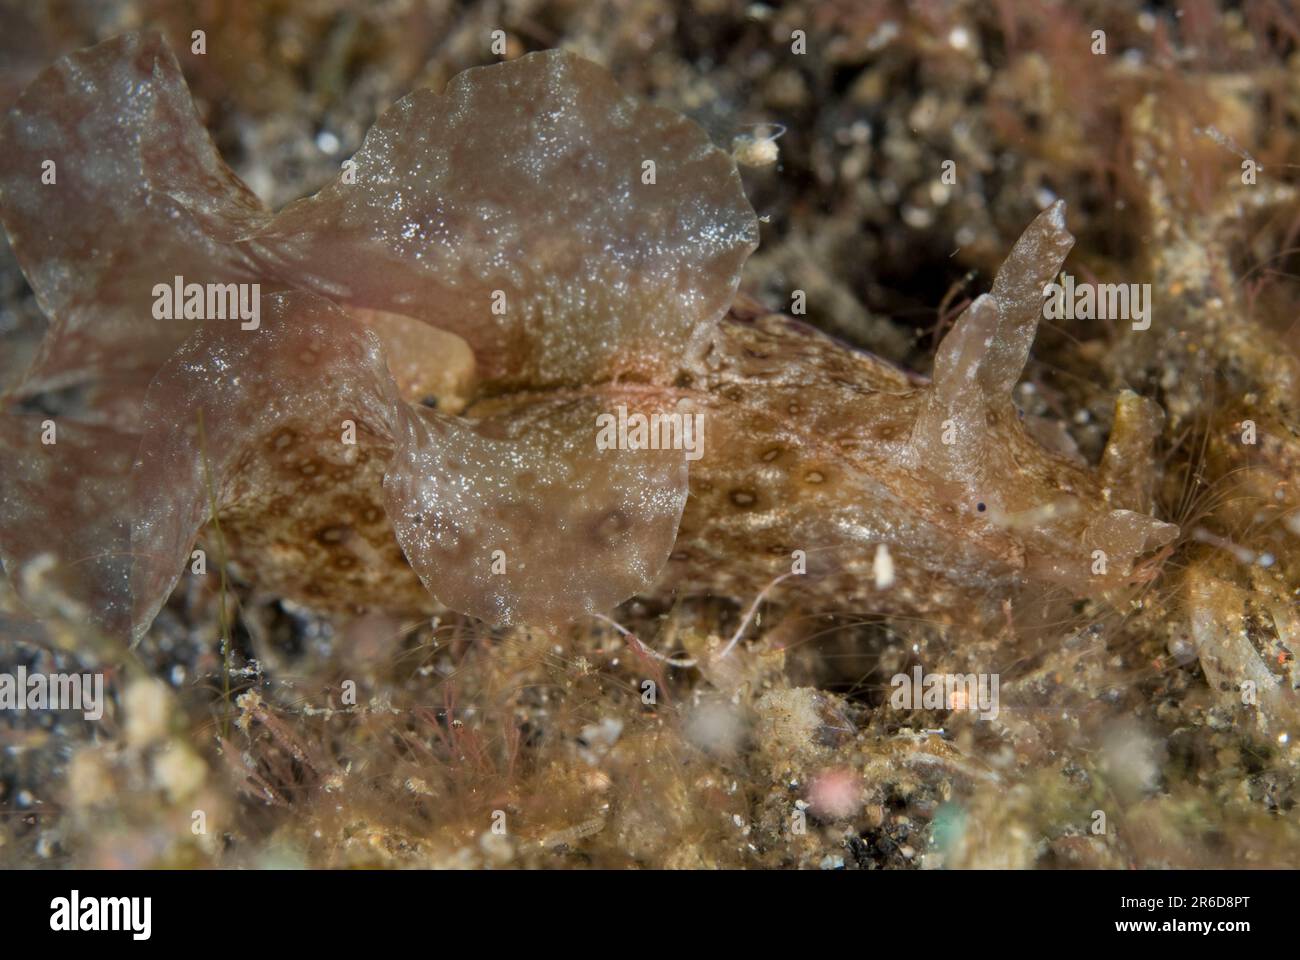 Spotted Sea Hare, Aplysia argus, Aer Perang dive site, Lembeh Straits, Sulawesi, Indonesia Stock Photo